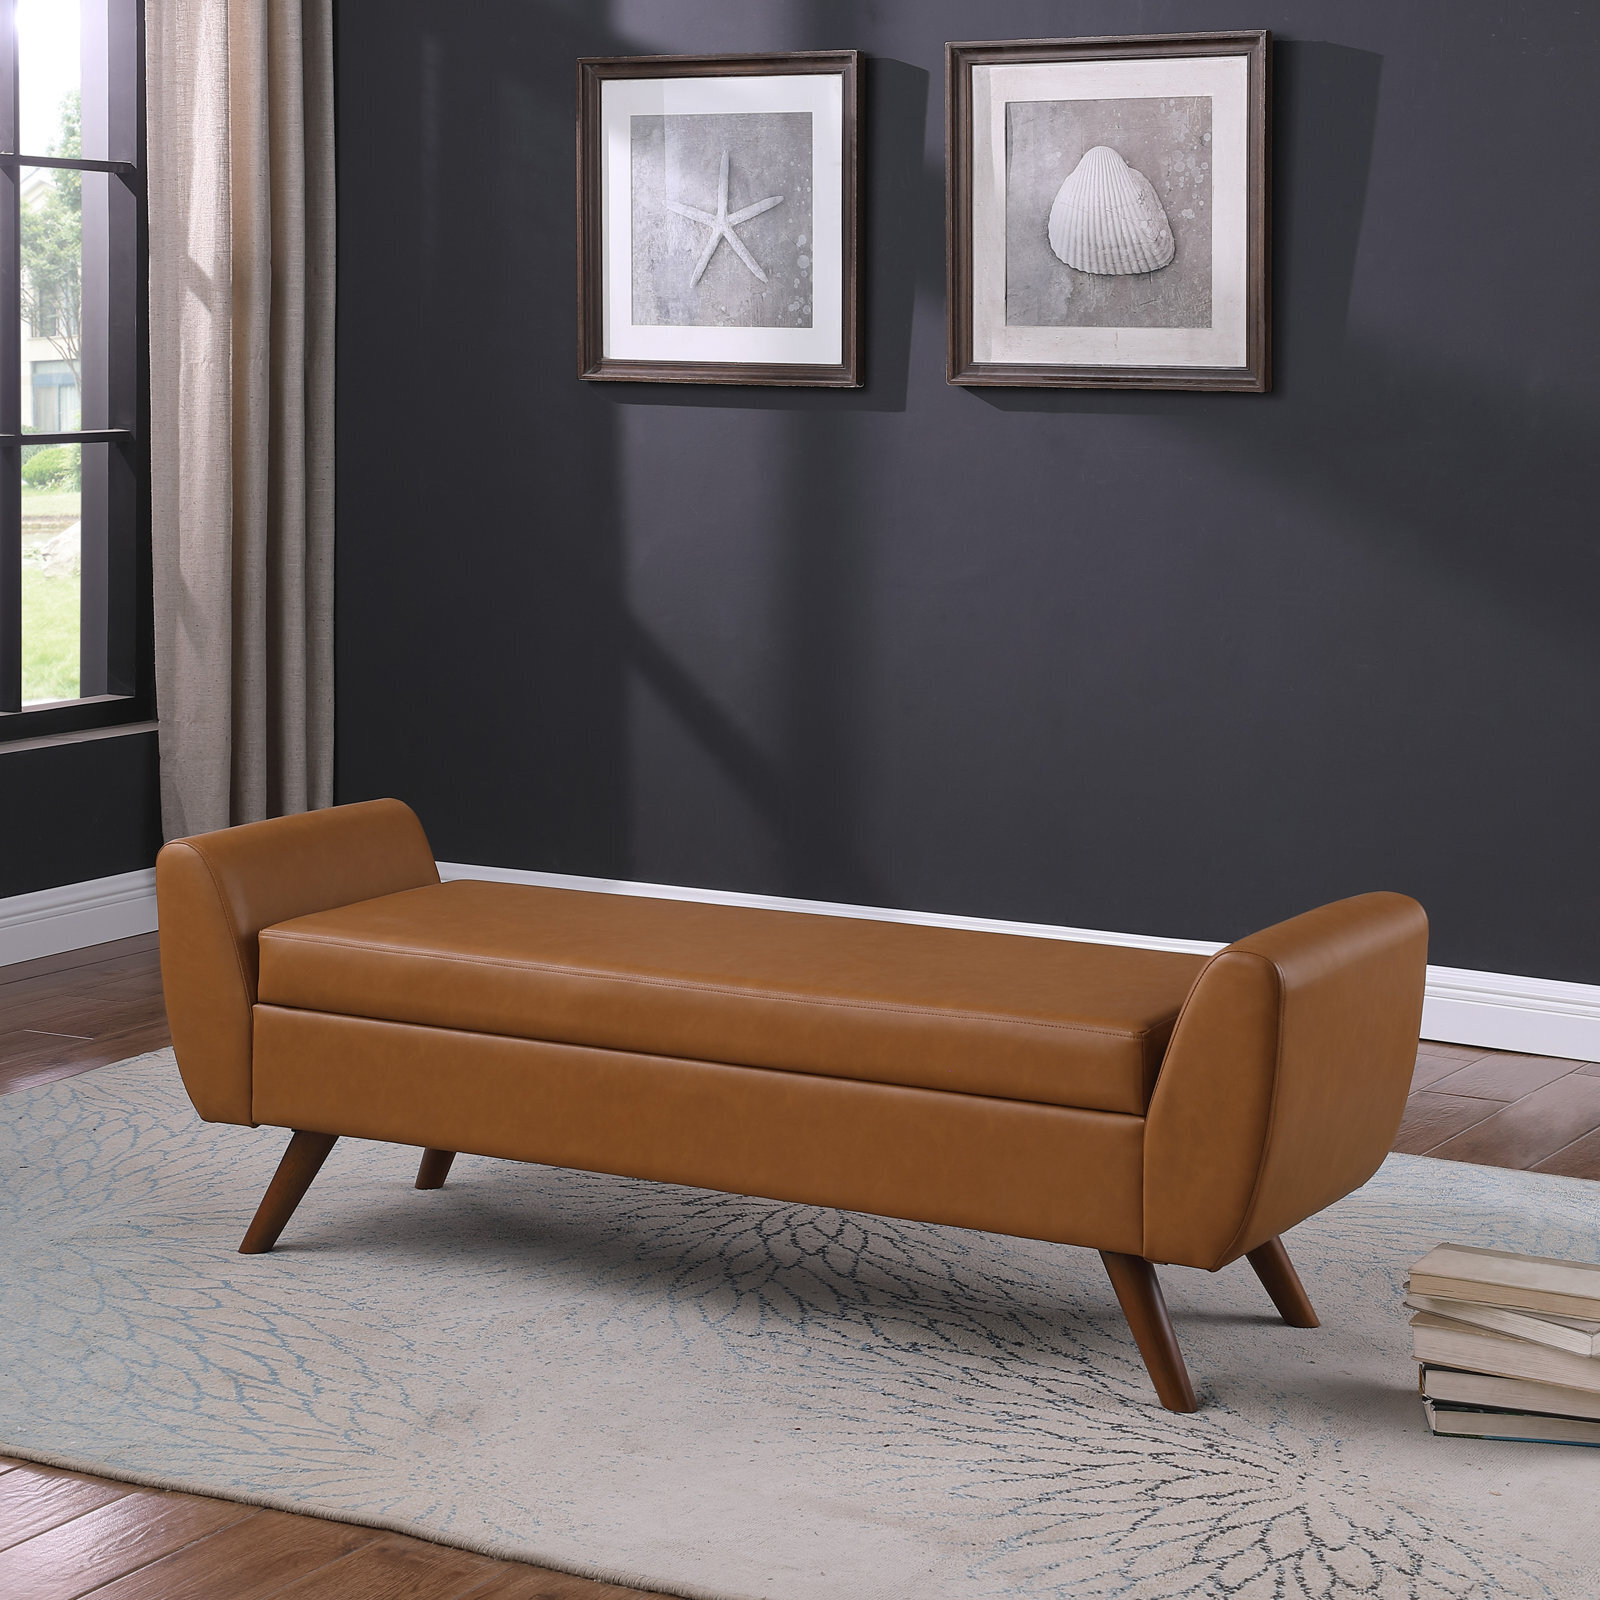 Upholstered Bench With Arms And Hinged Lid Storage